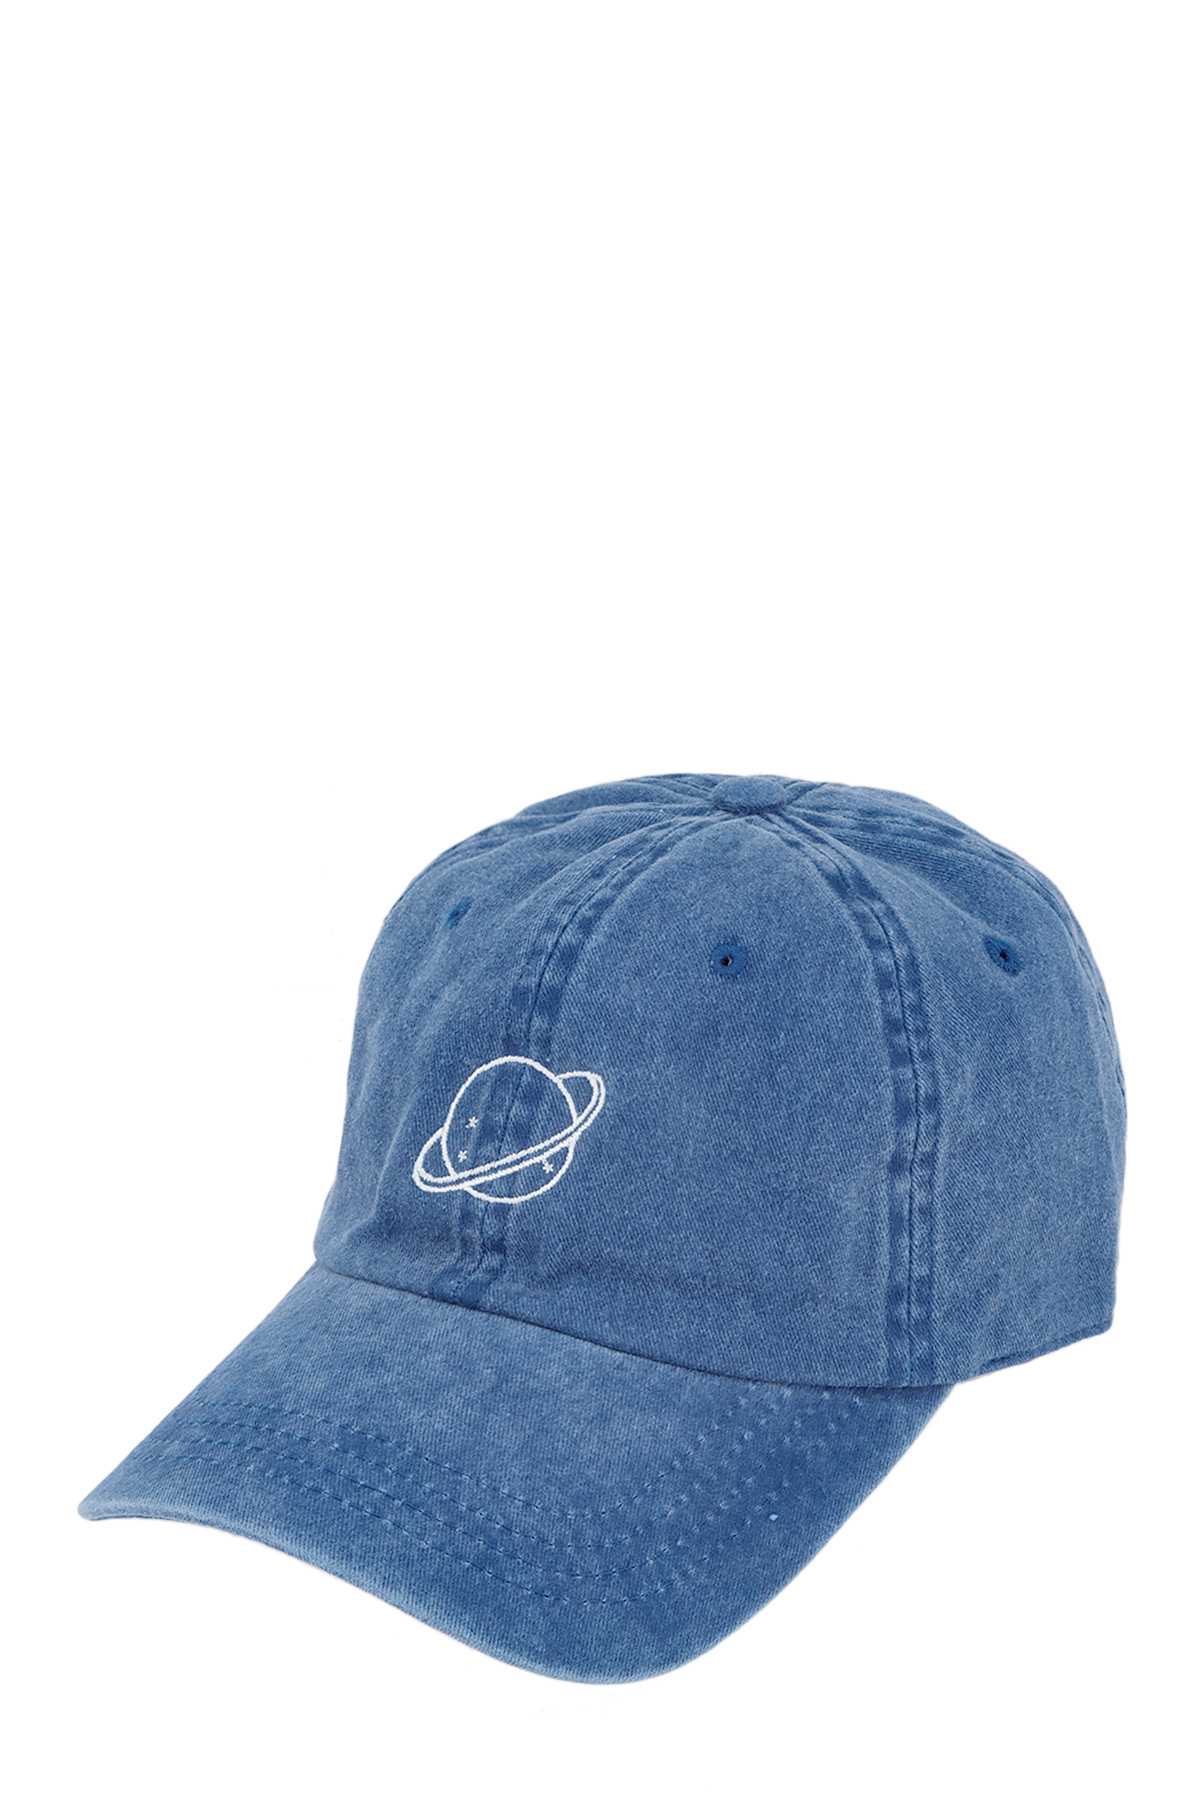 Planet with Stars Embroidery Pigment Cap